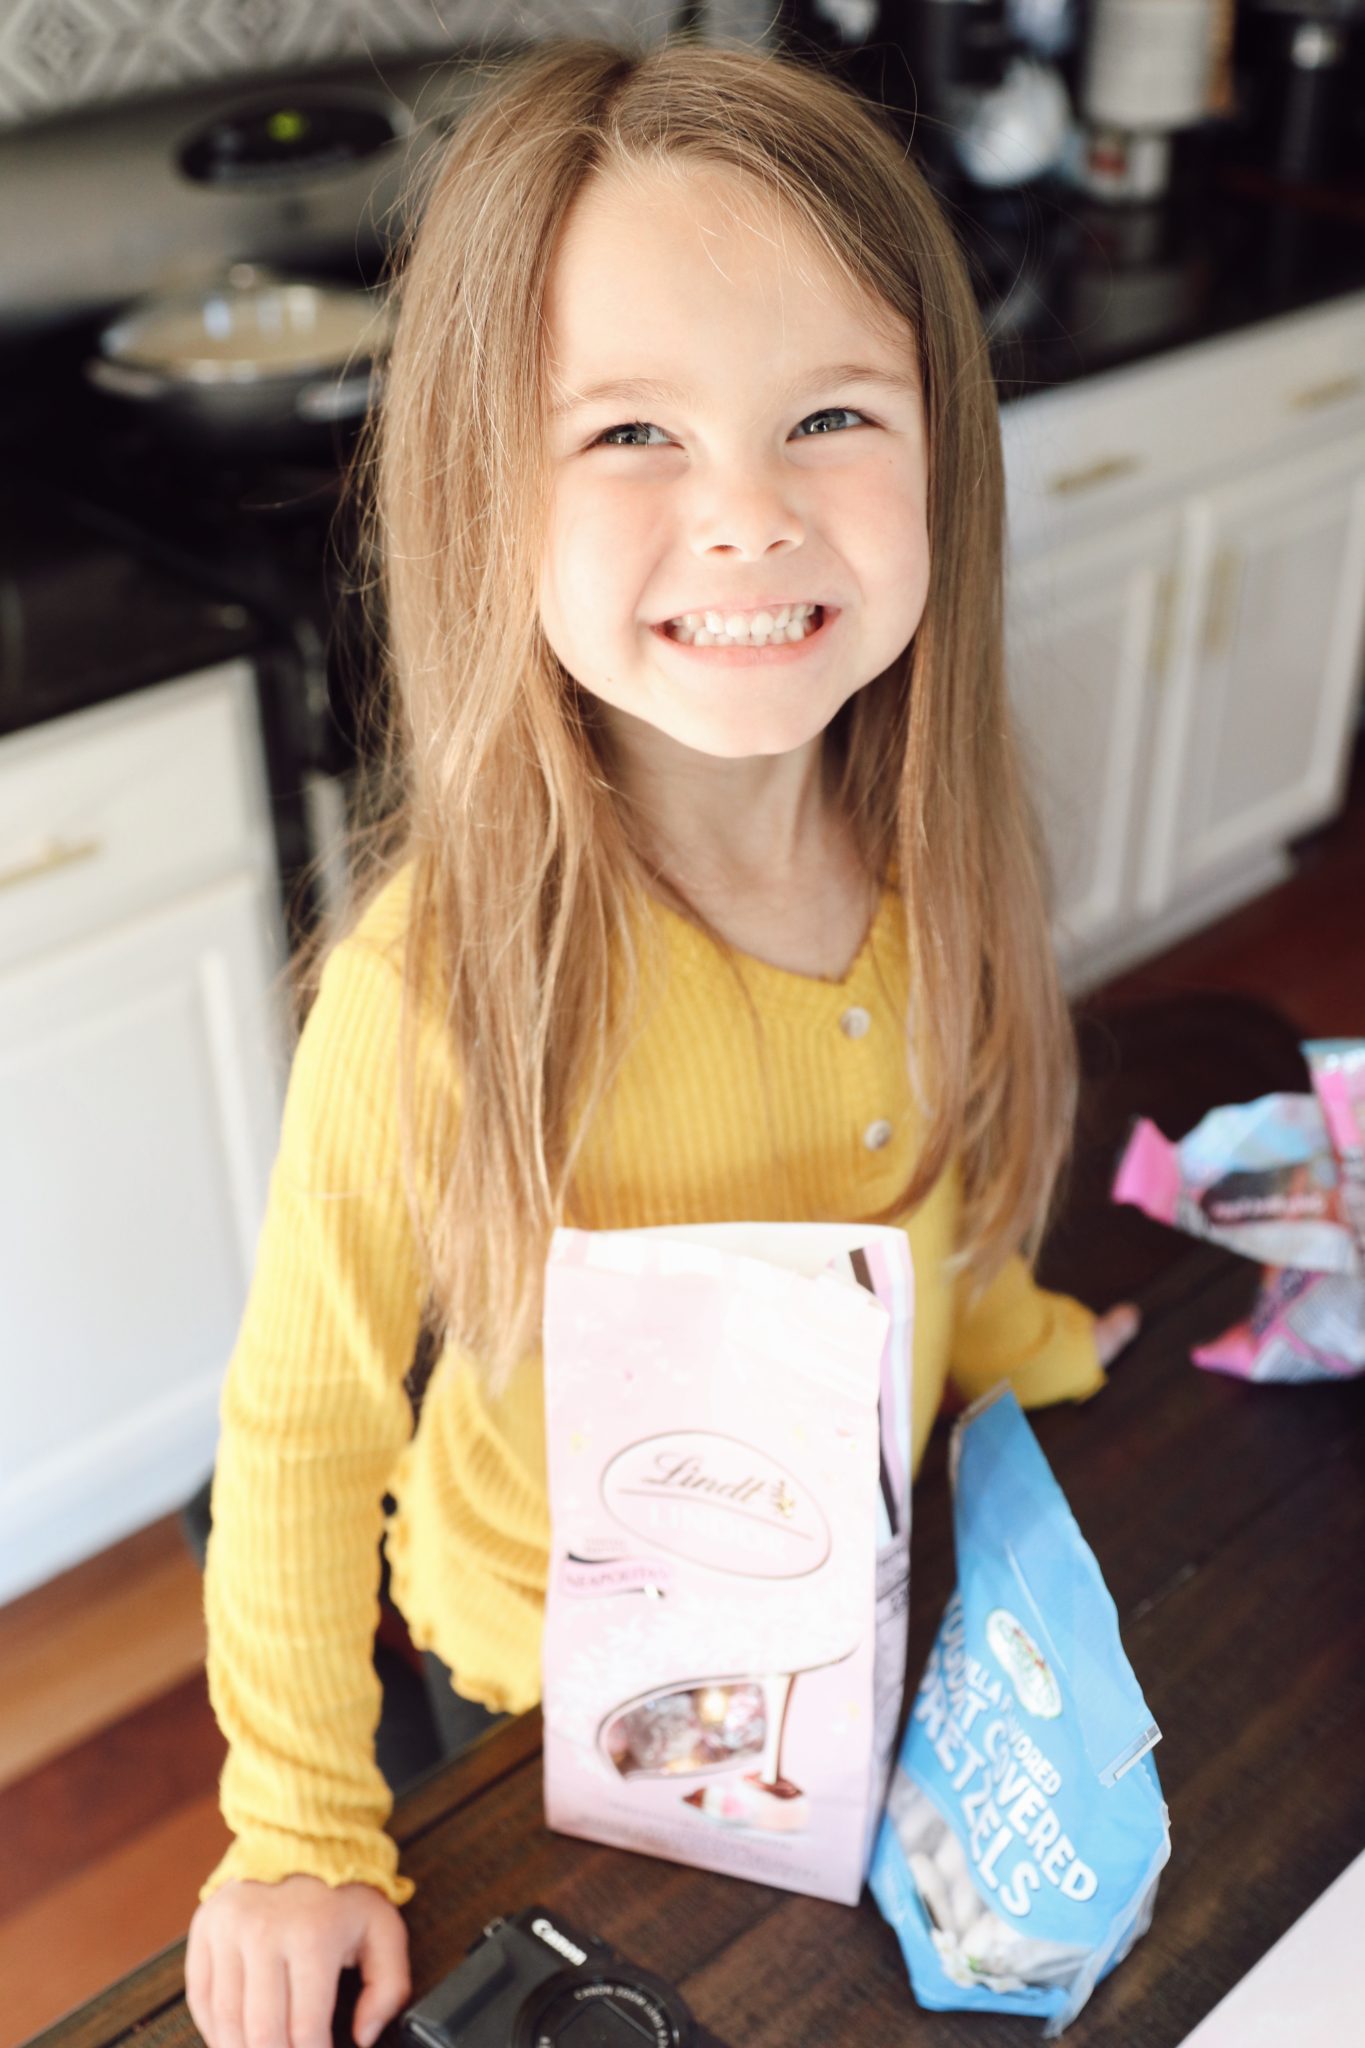 Easter Charcuterie Board Ideas by popular Nashville lifestyle blog, Nashville Wifestyles: image of a little girl standing next to some bags of Lindt chocolates.